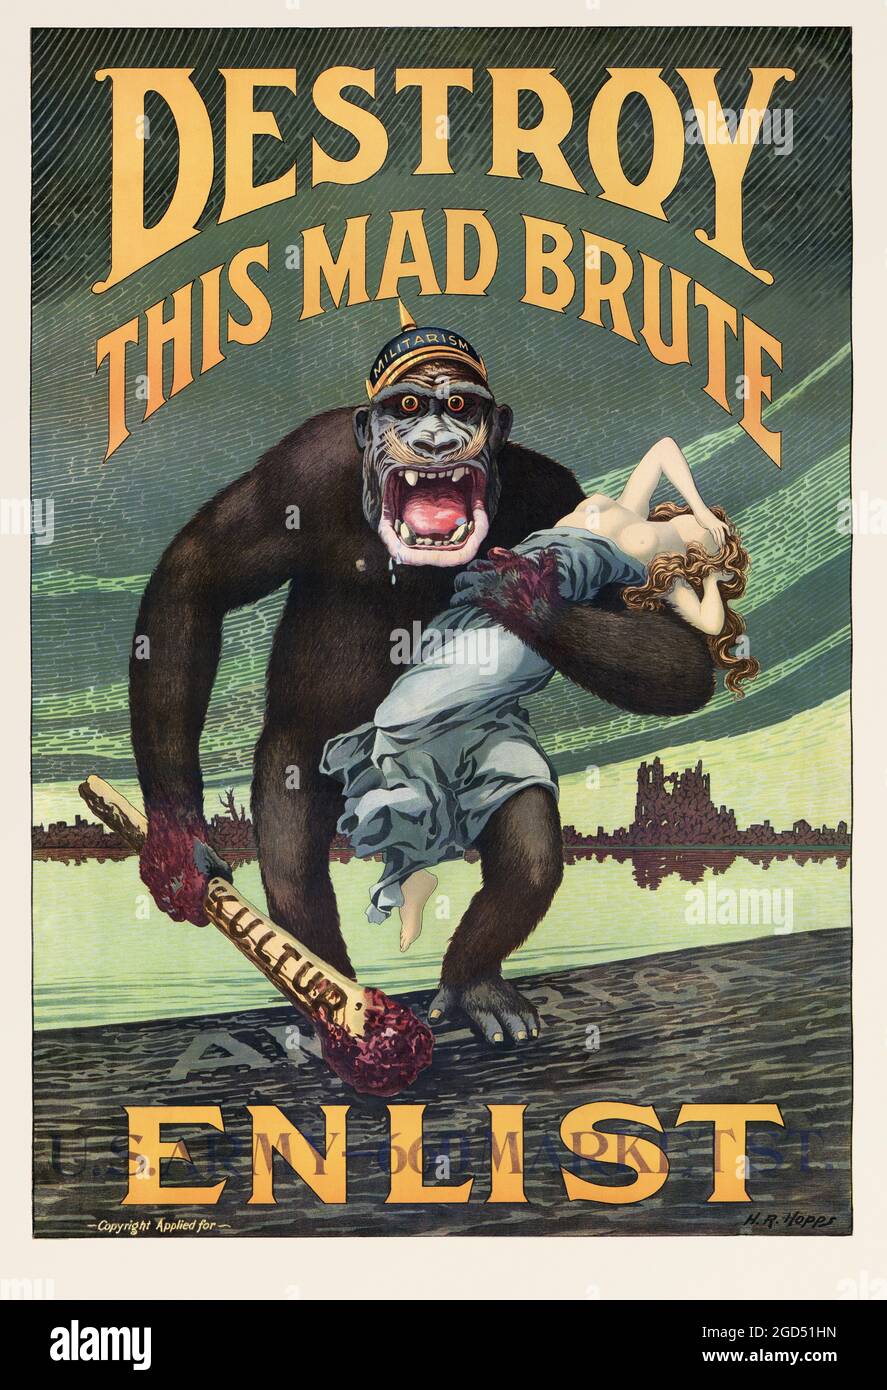 Destroy this mad brute Enlist - U.S. Army - Old and vintage propaganda / recruitment poster. 1917. San Francisco Army Recruiting District. Stock Photo